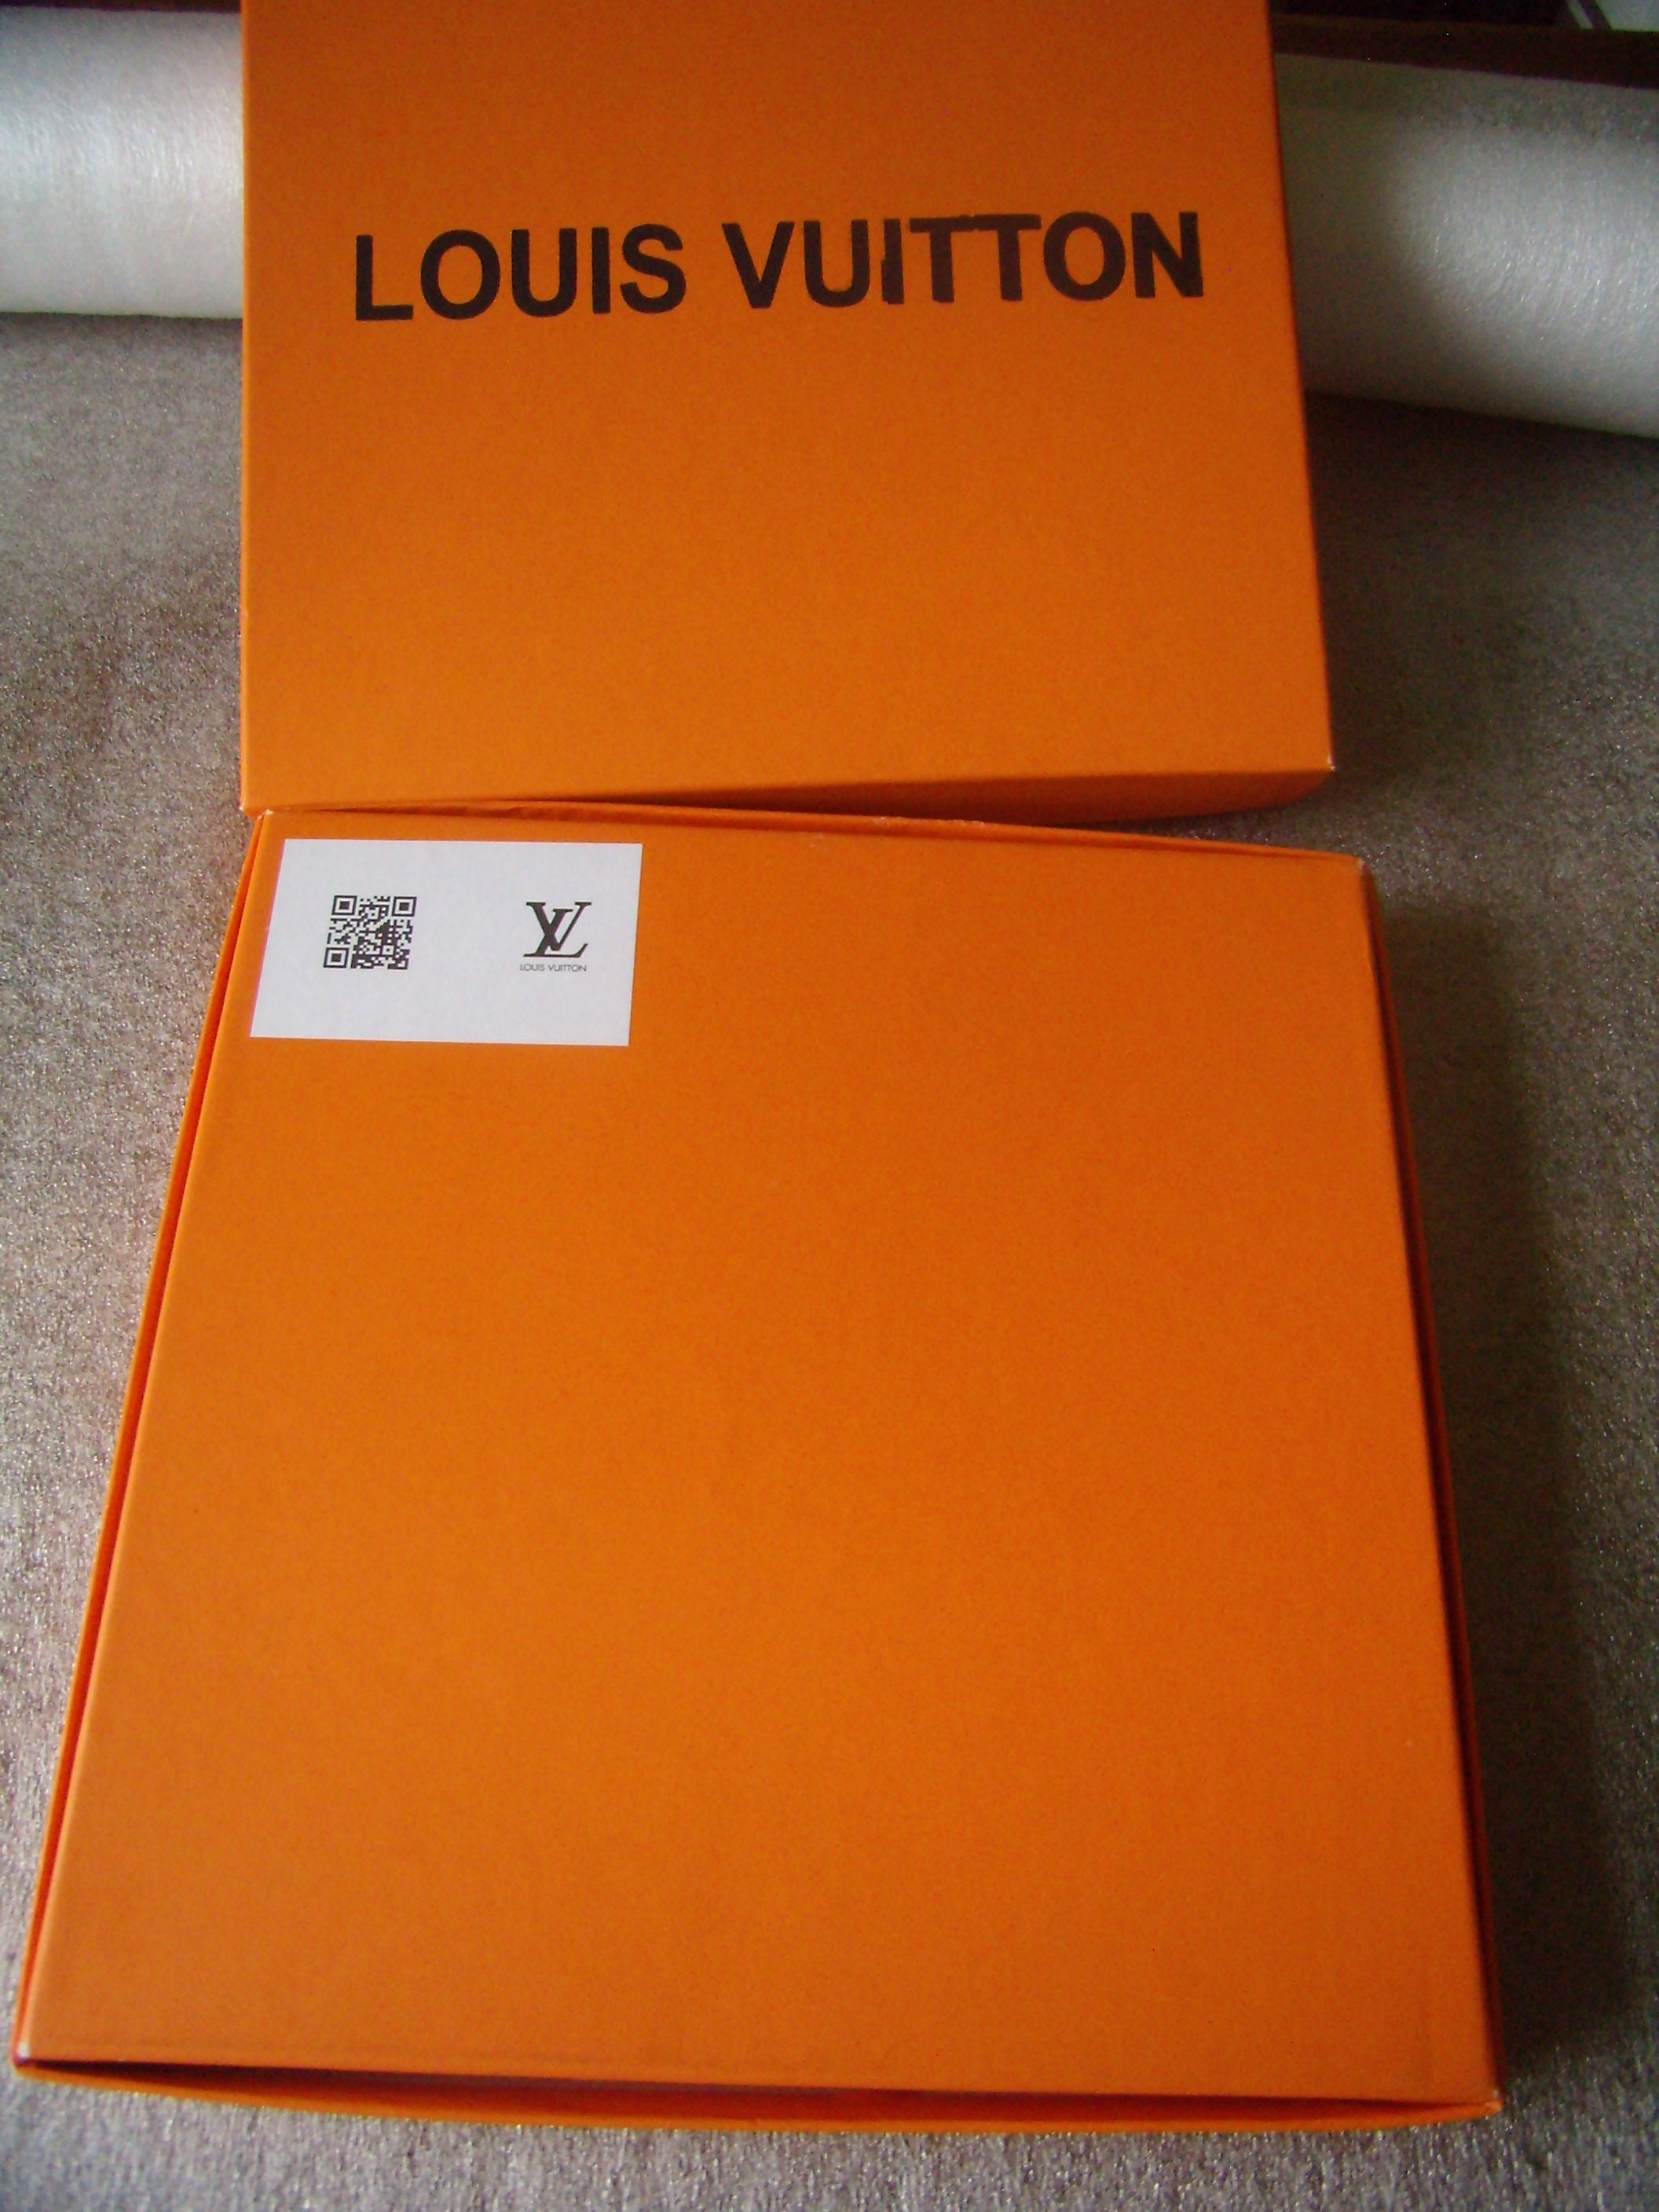 Buy French Vuitton Box Online In India -  India